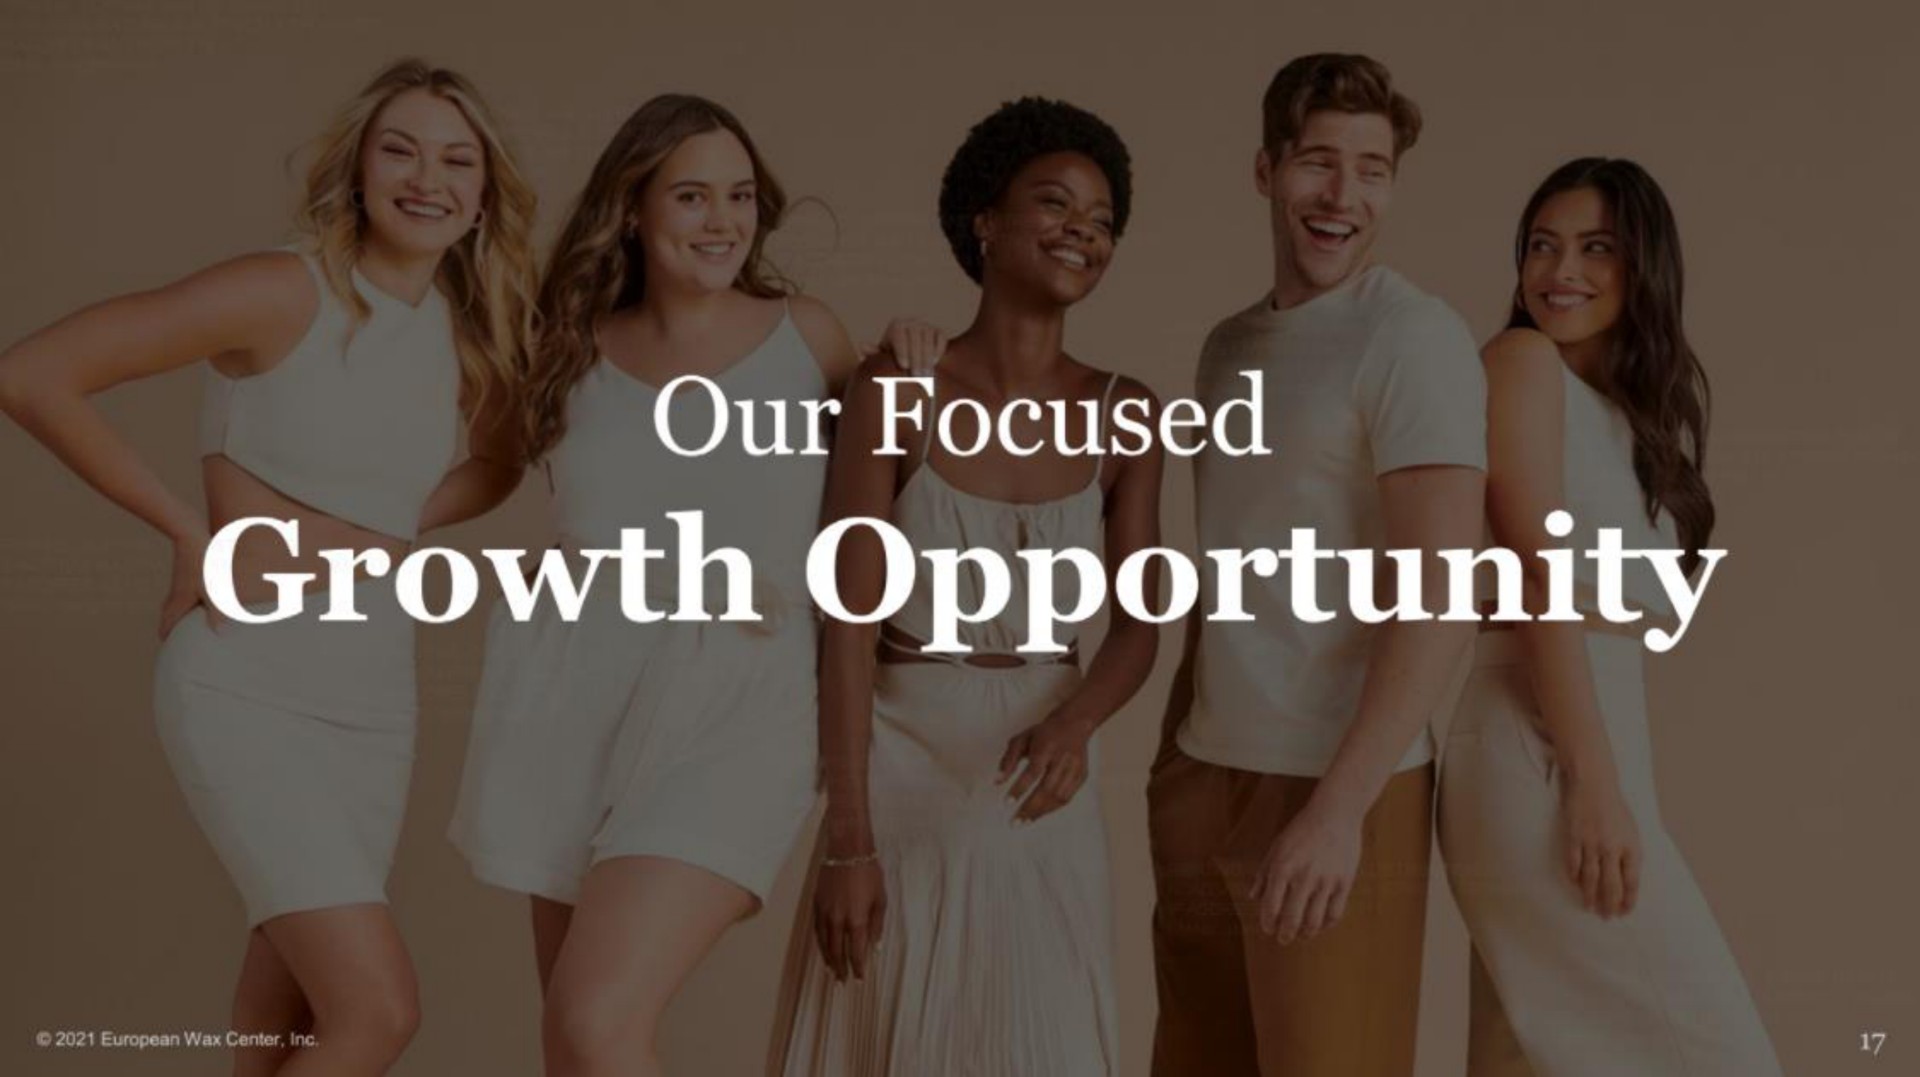 our focused growth opportunity | European Wax Center